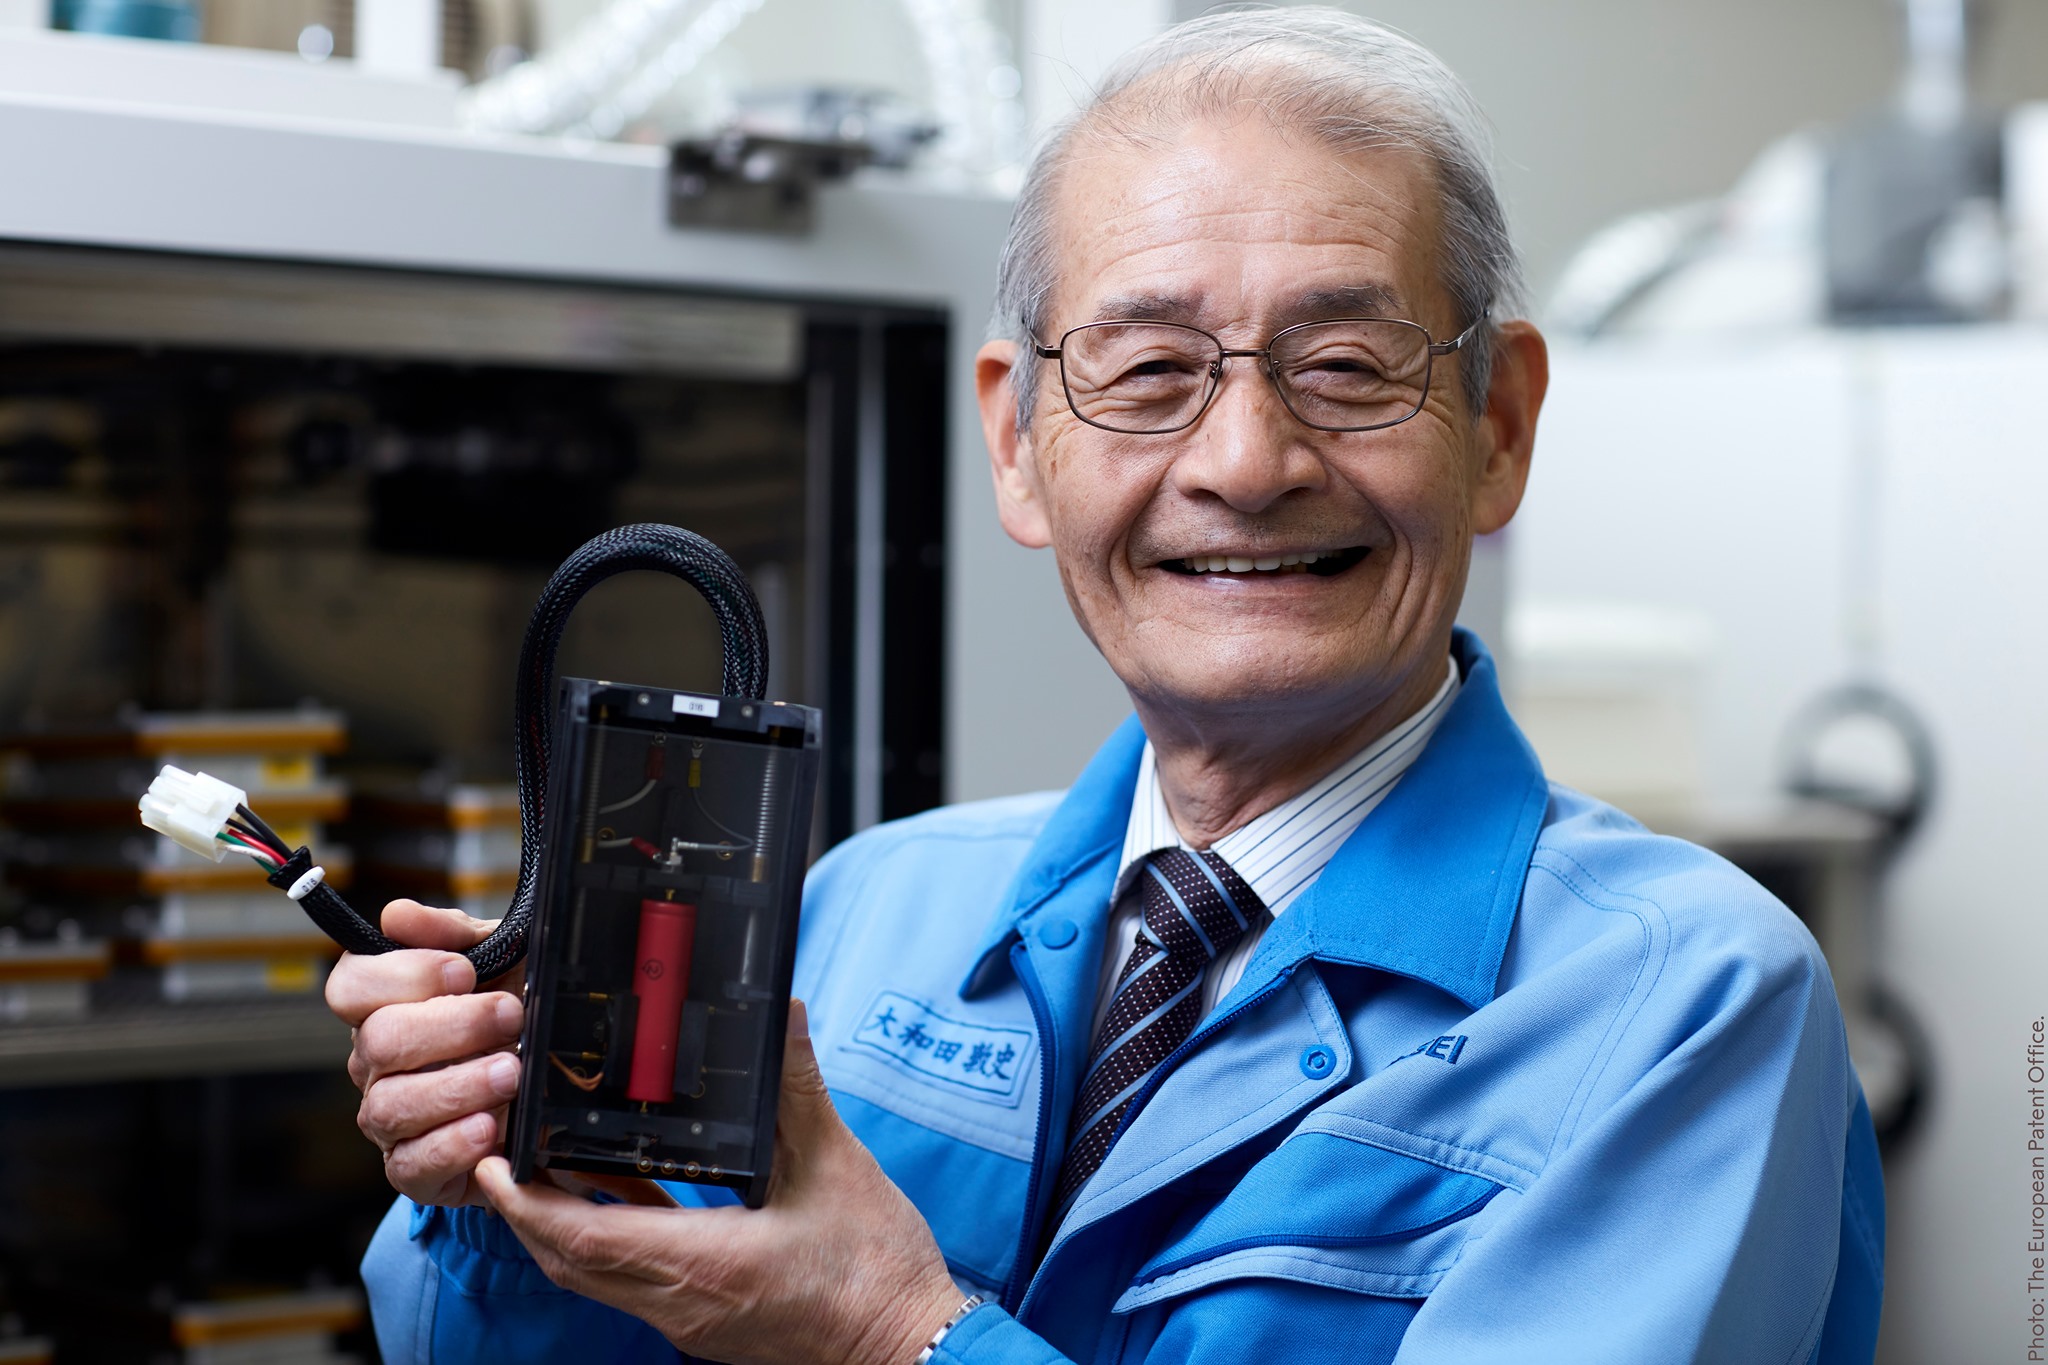 Akira Yoshino is the developer of the first commercially viable lithium-ion battery.